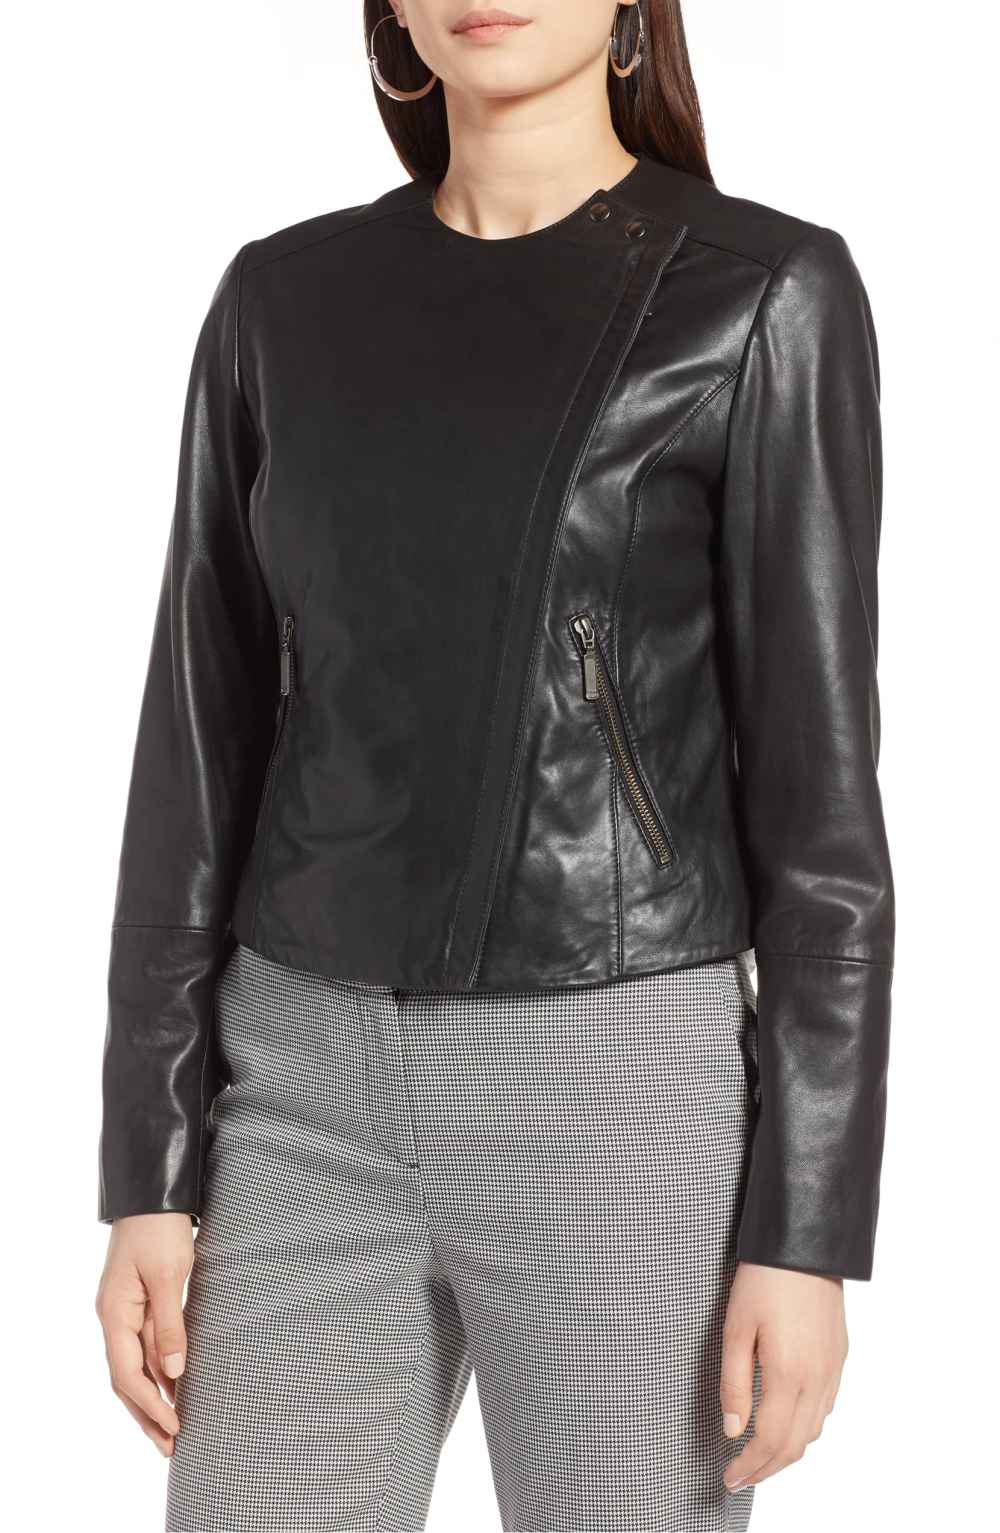 Welcome Fall in Style With This Collarless Leather Jacket